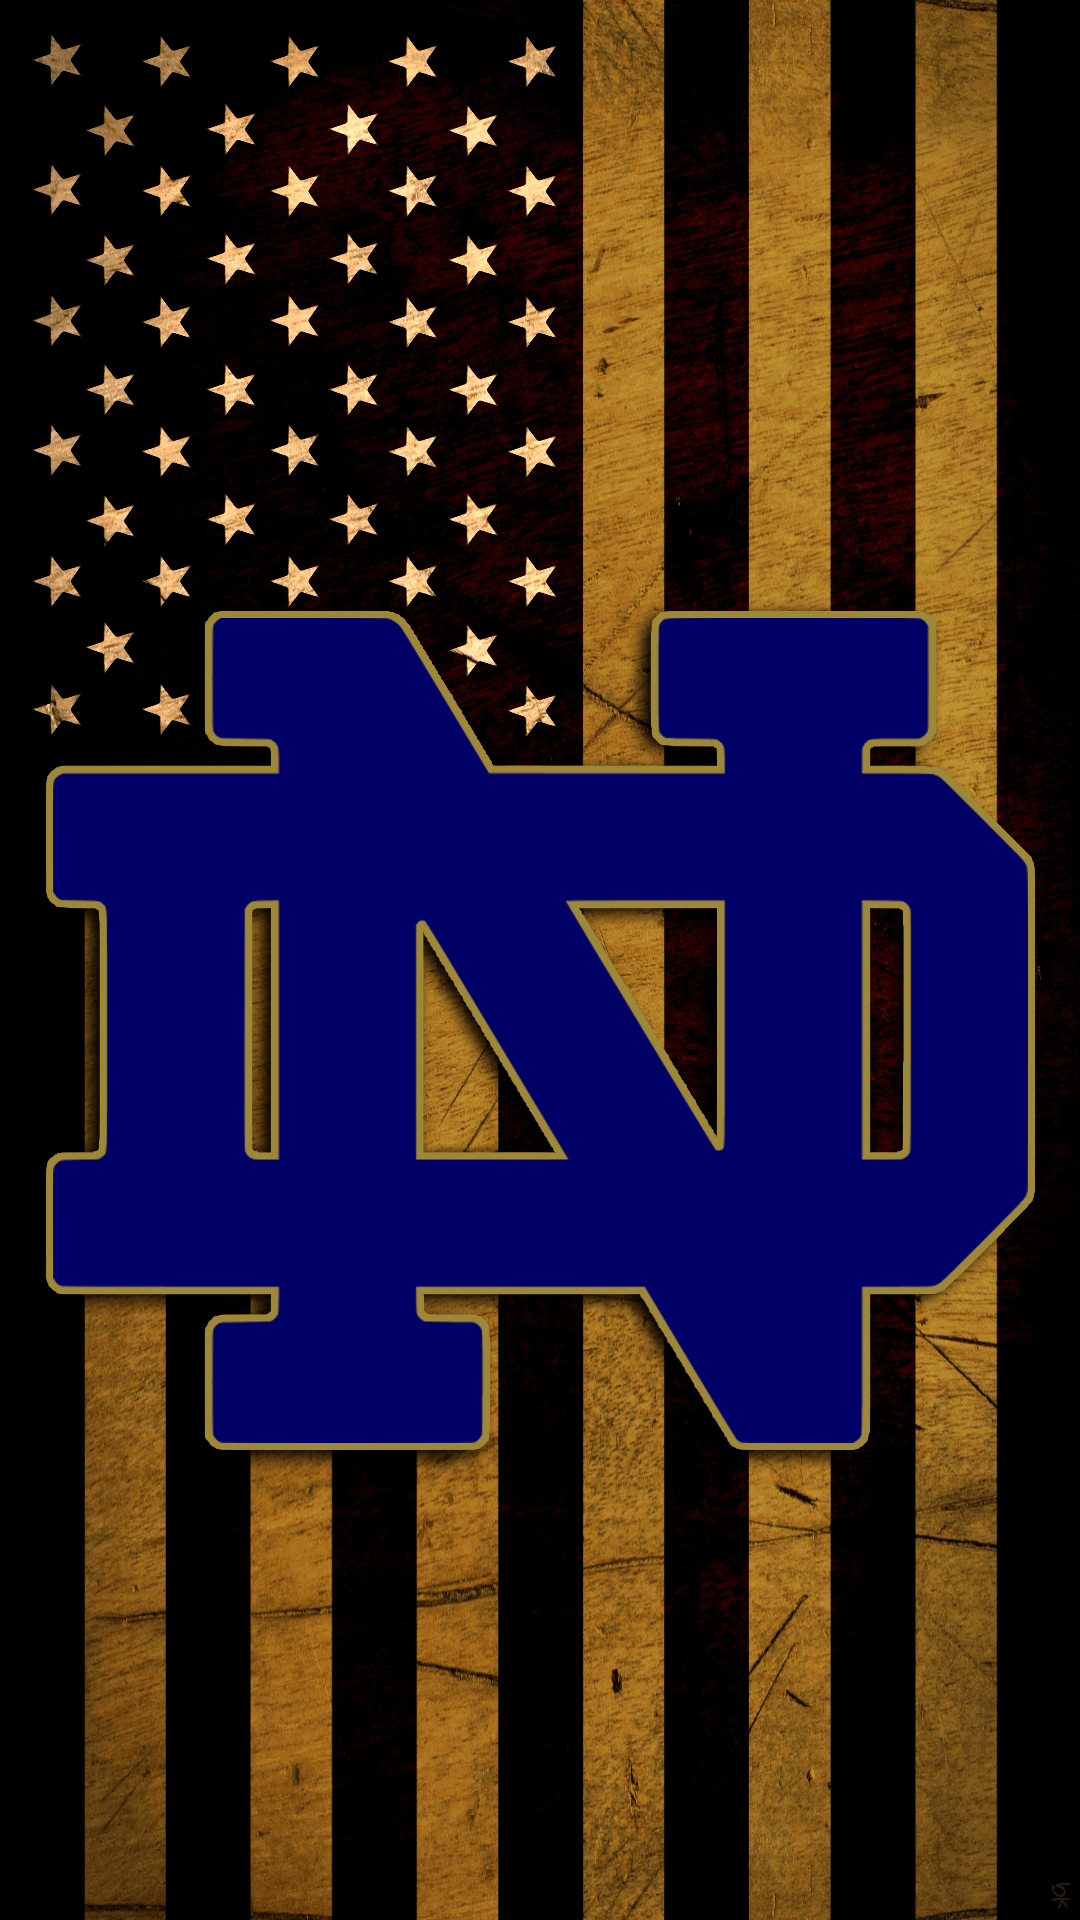 Notre Dame Football Wallpapers  Top Free Notre Dame Football Backgrounds   WallpaperAccess